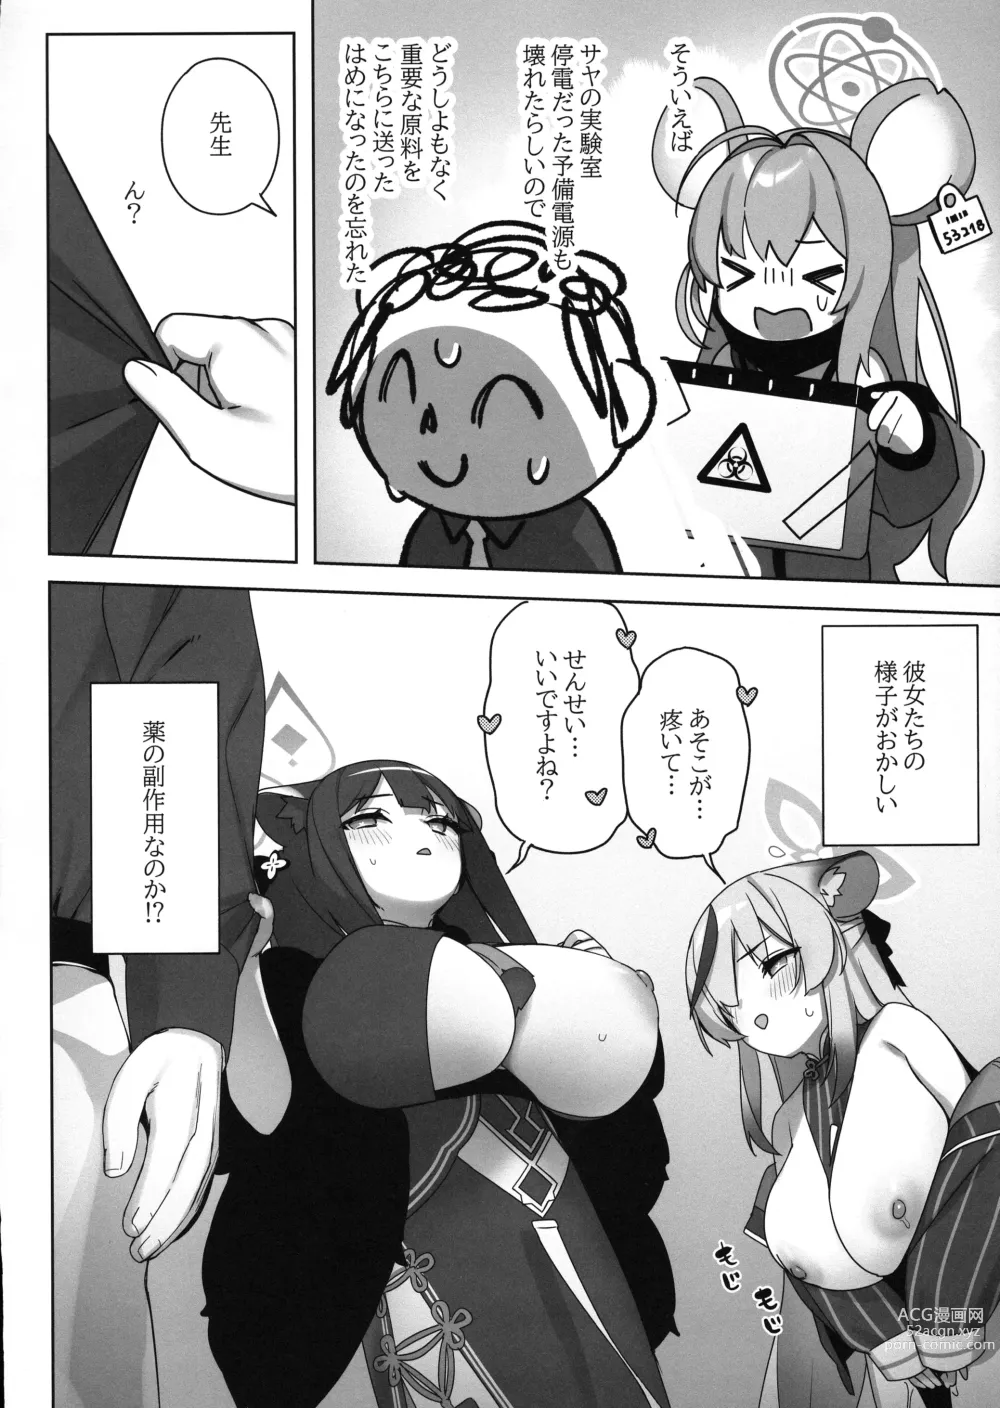 Page 6 of doujinshi Shuekoko Expansion - Live for oppai loli, Die for oppai loli